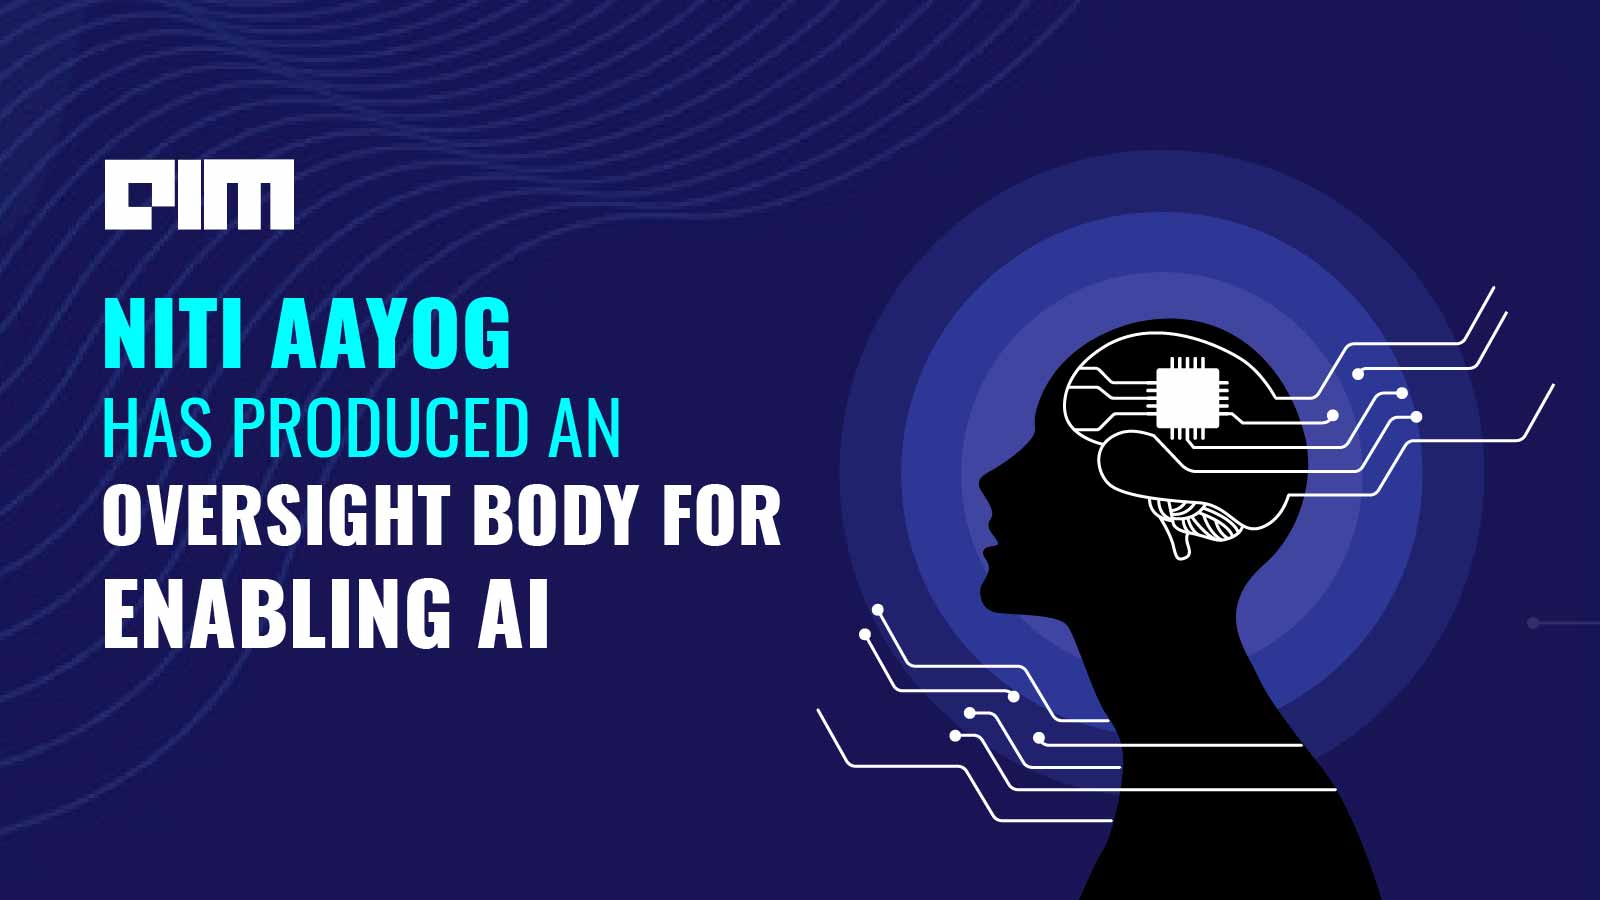 What An Oversight Body Could Mean For The Growth Of AI In India?